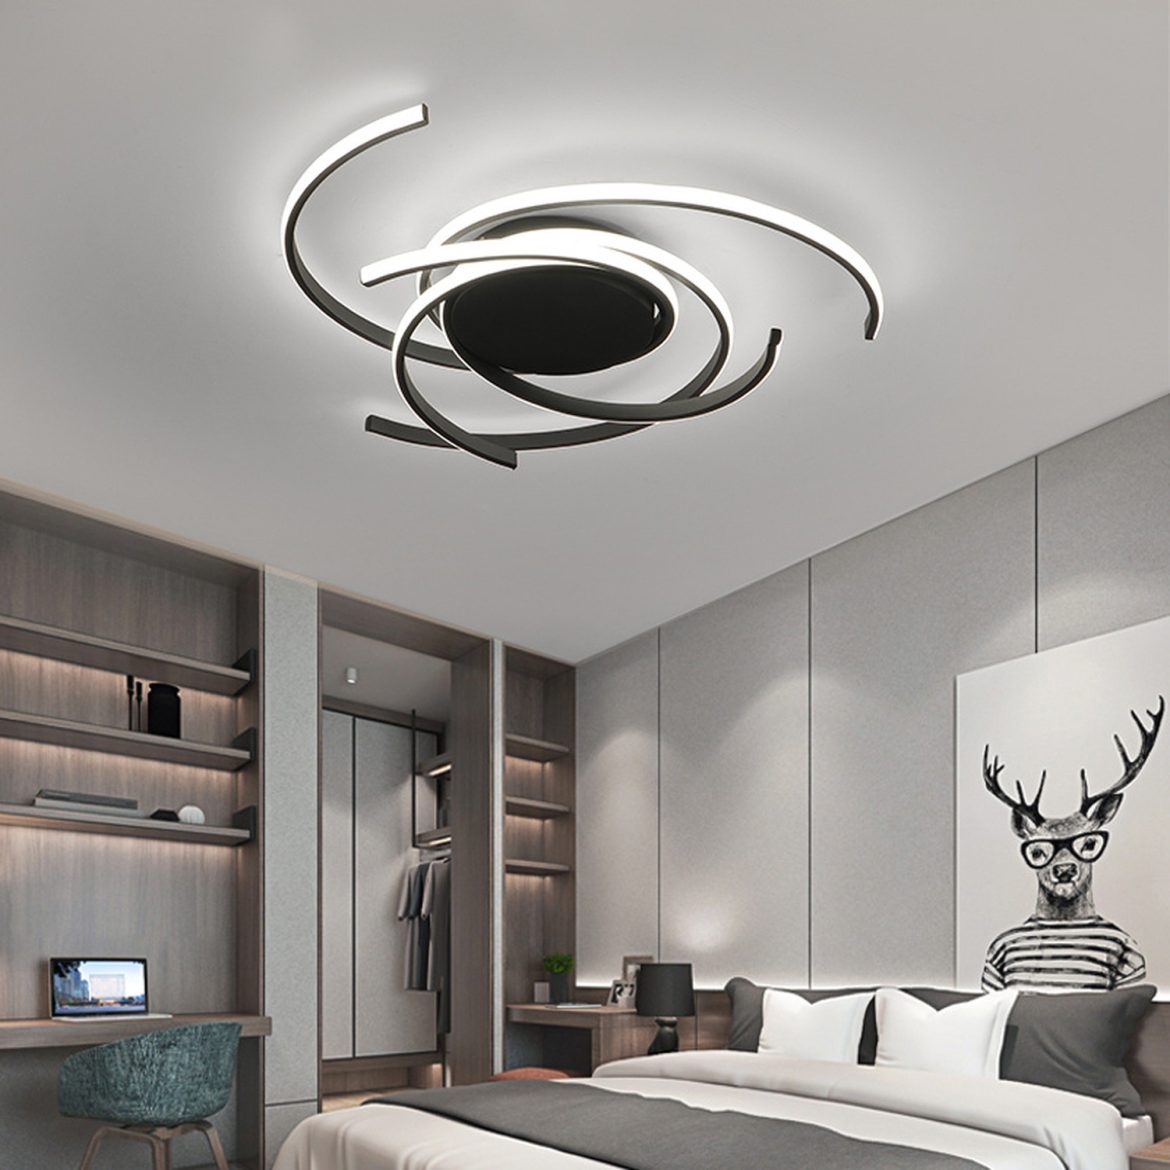 How to Customize Your Ceiling Lights